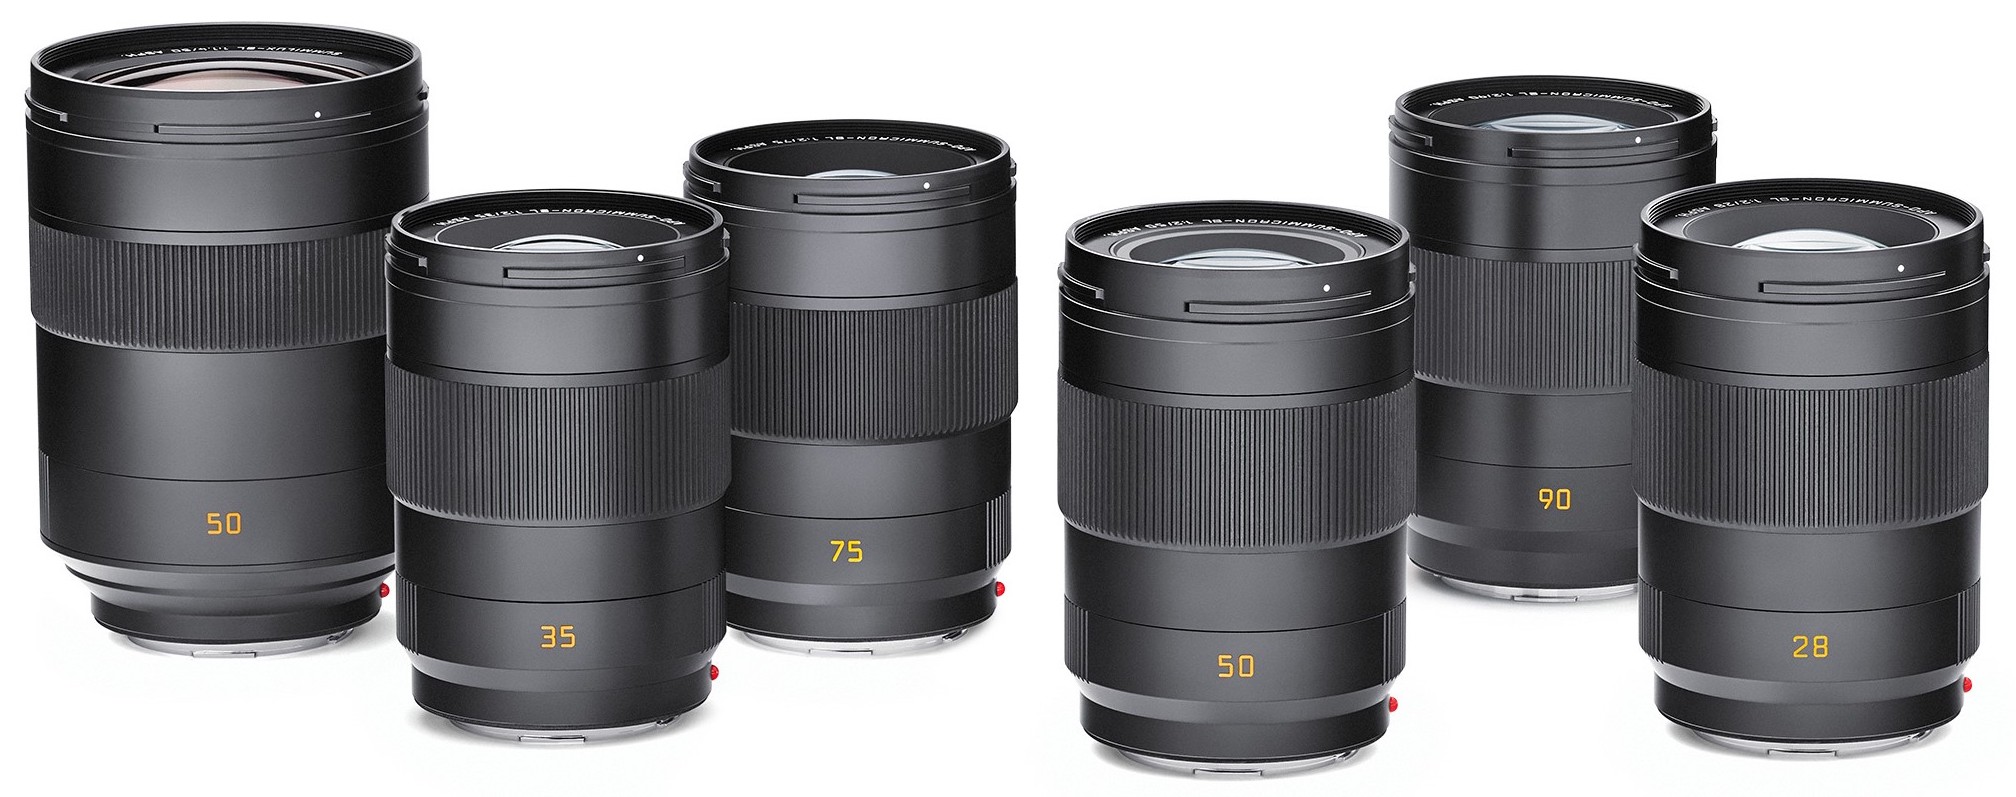 The price of the new Leica APO-Summicron-SL 28mm f/2 ASPH lens 